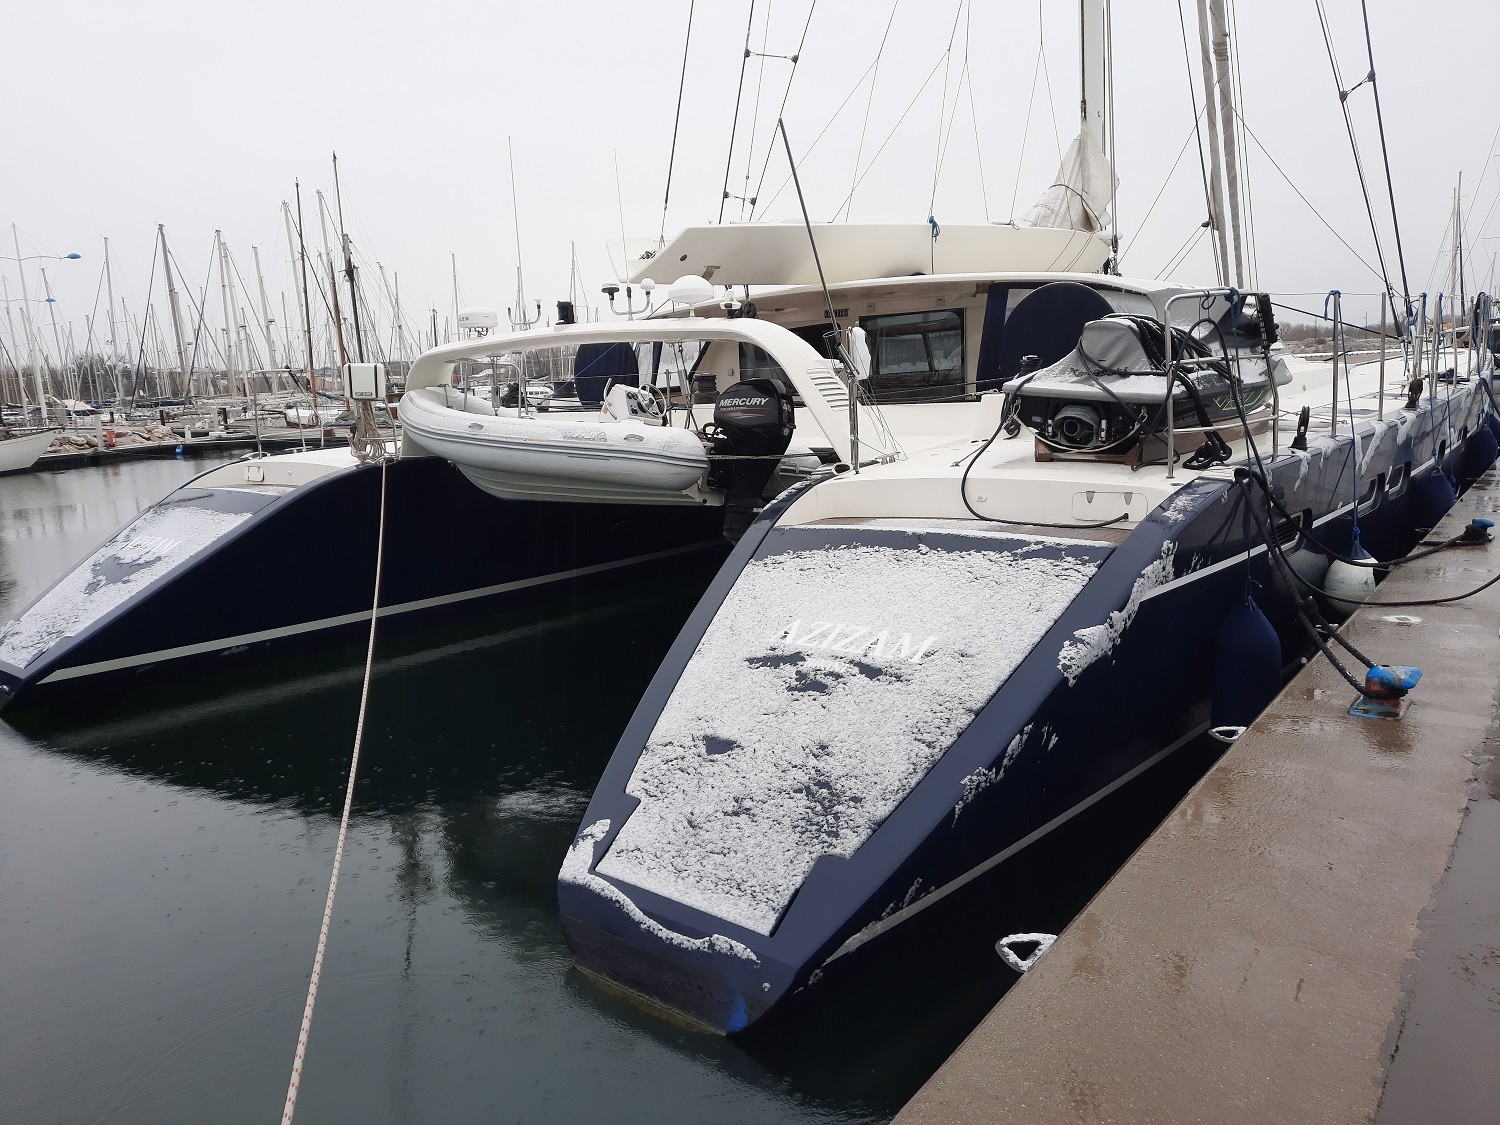 Storm and snow in Canet en Roussillon